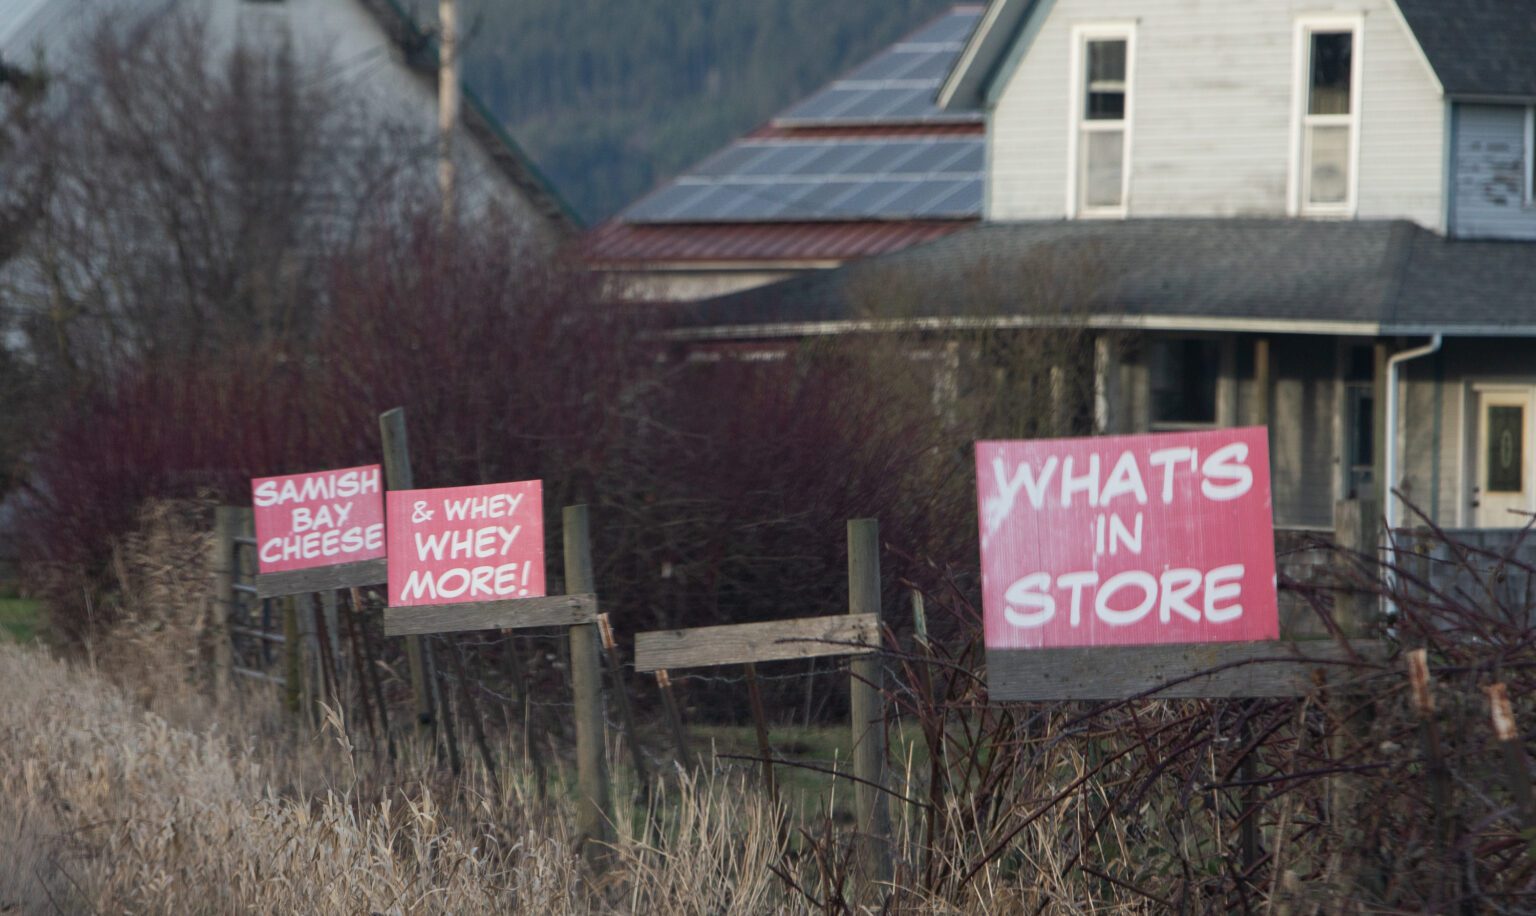 Signs advertise the Samish Bay Cheese store in Bow on Feb. 8. Skagit County is considering changes to what it considers acceptable agritourism